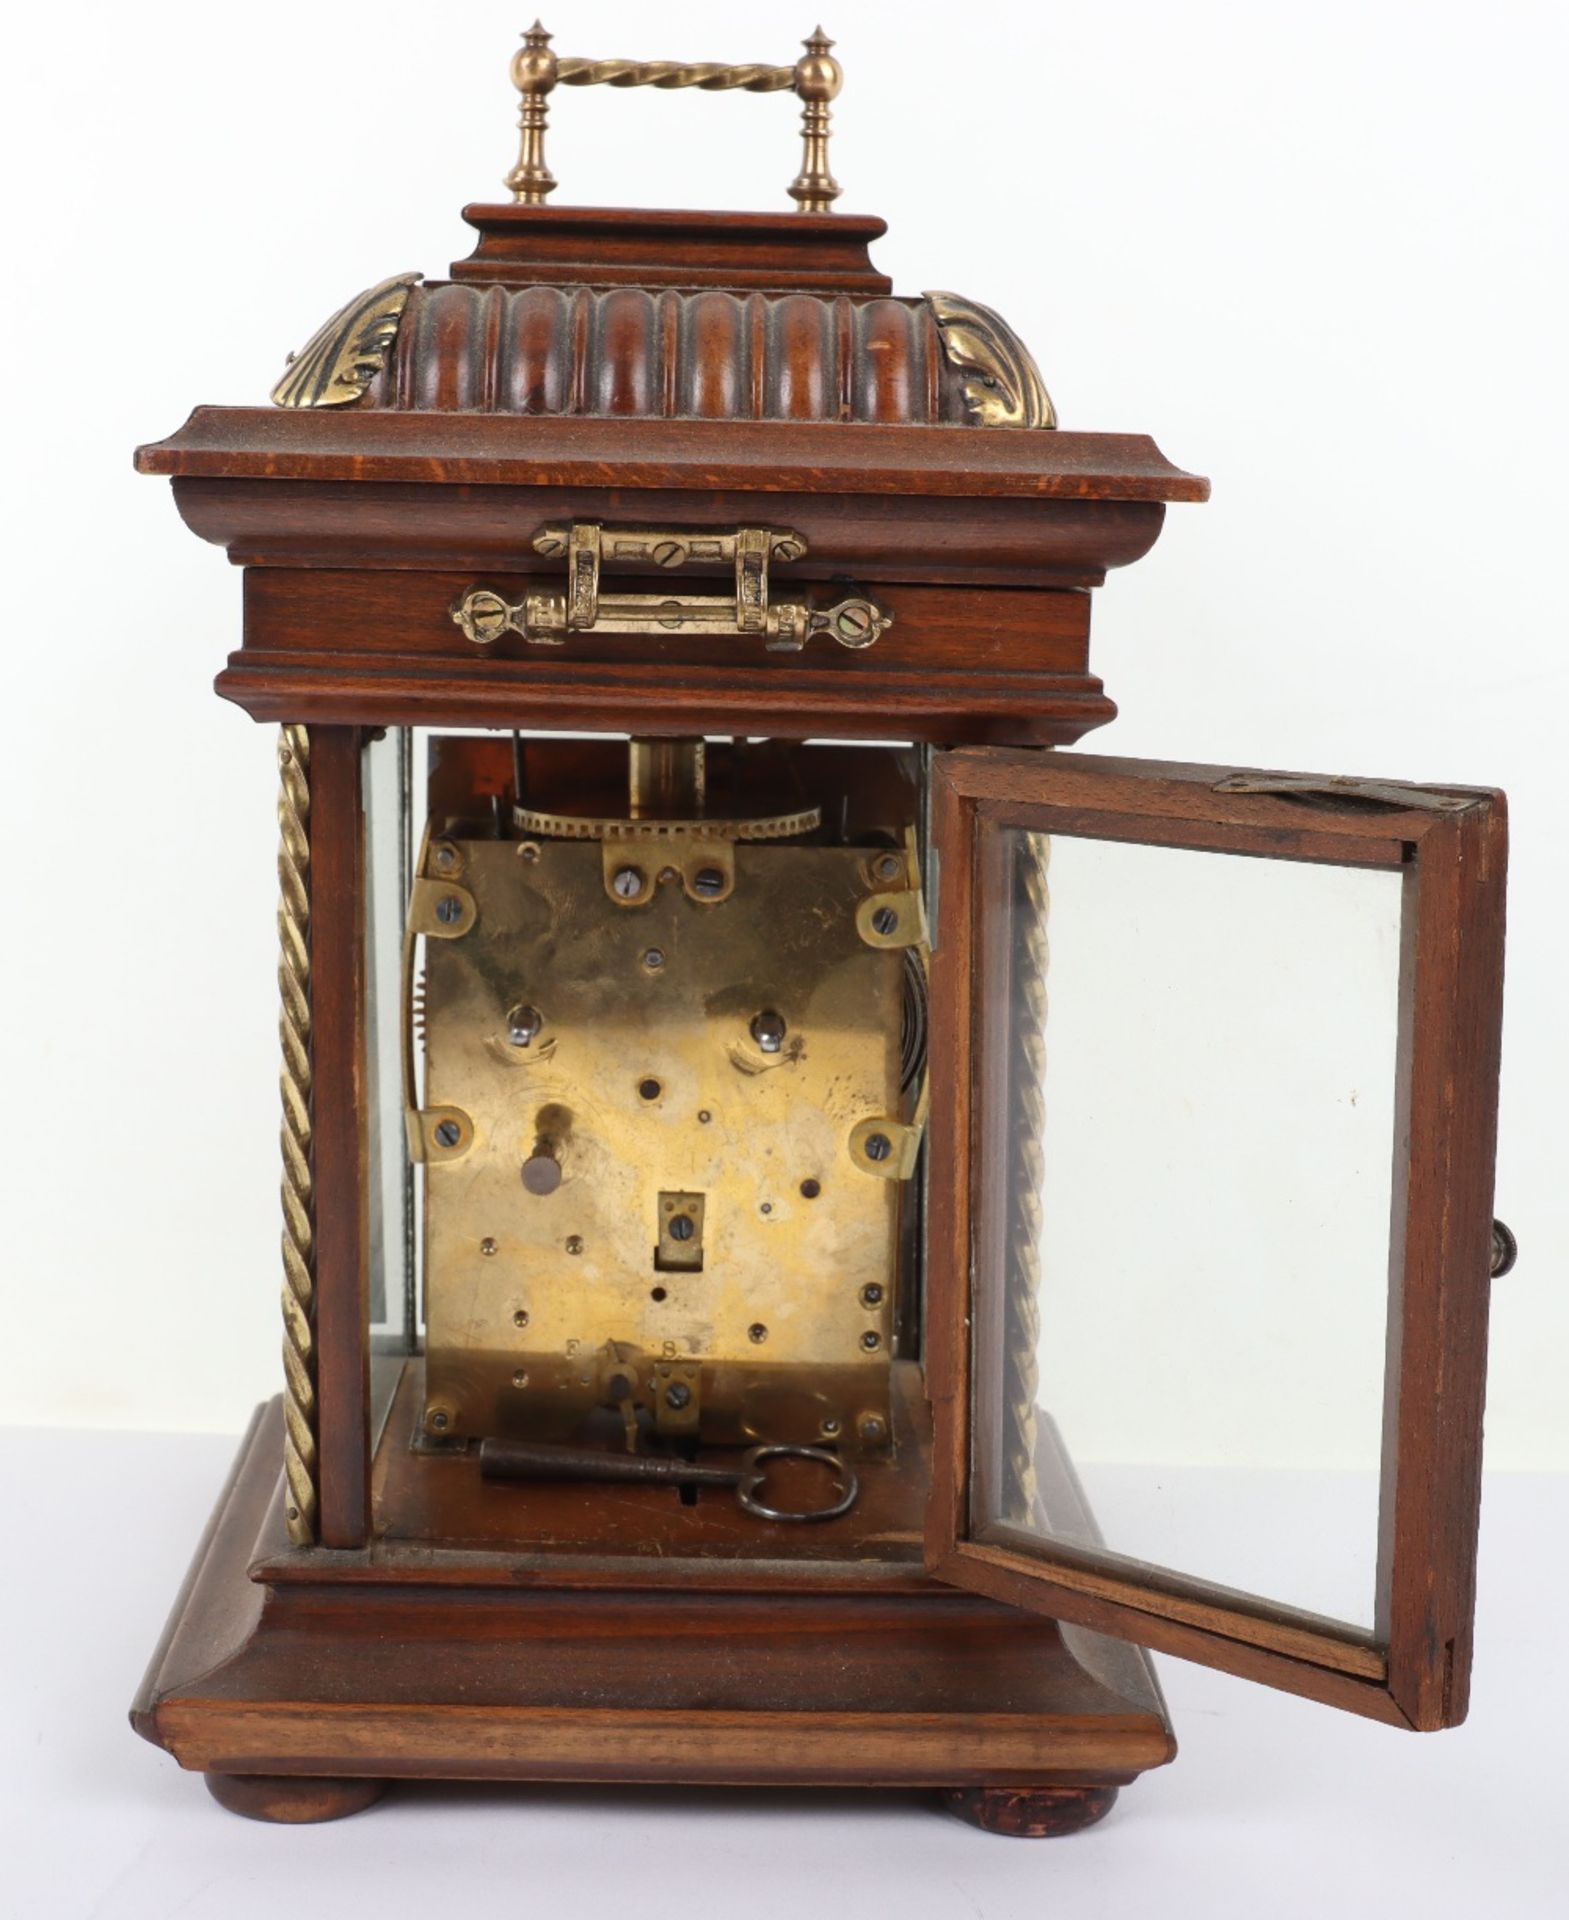 A German ‘Harmonie Symphonion’ mantle clock and musical box - Image 5 of 8